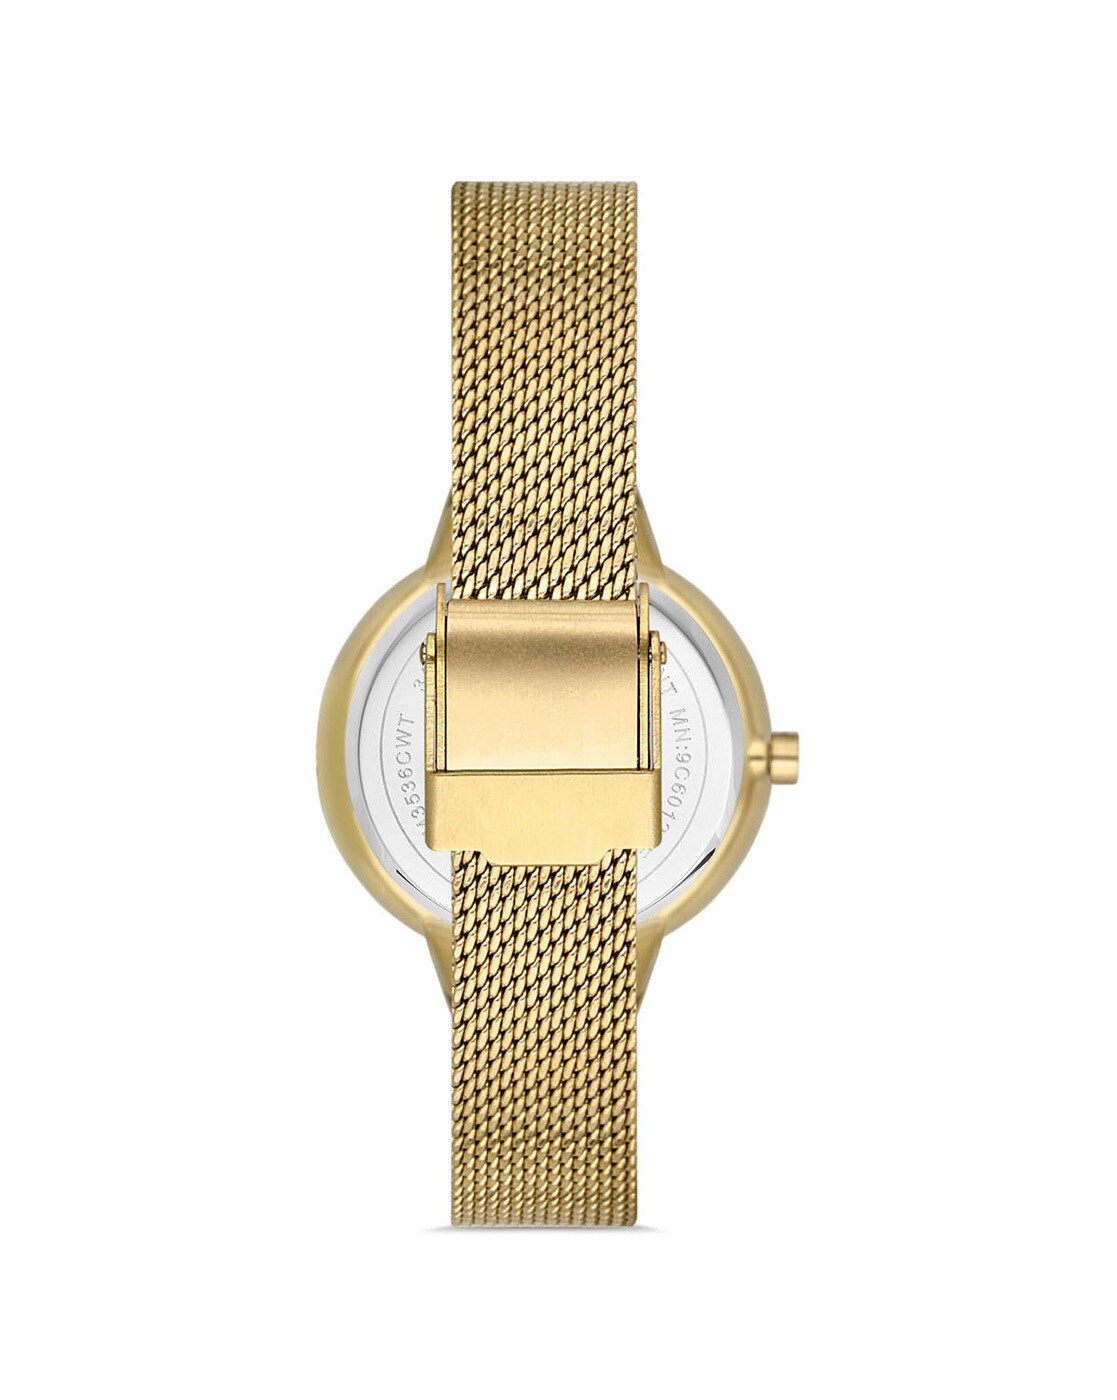 Women Gold Mesh Watch Gift Set with 7 Changeable Bezels - Peugeot Watches